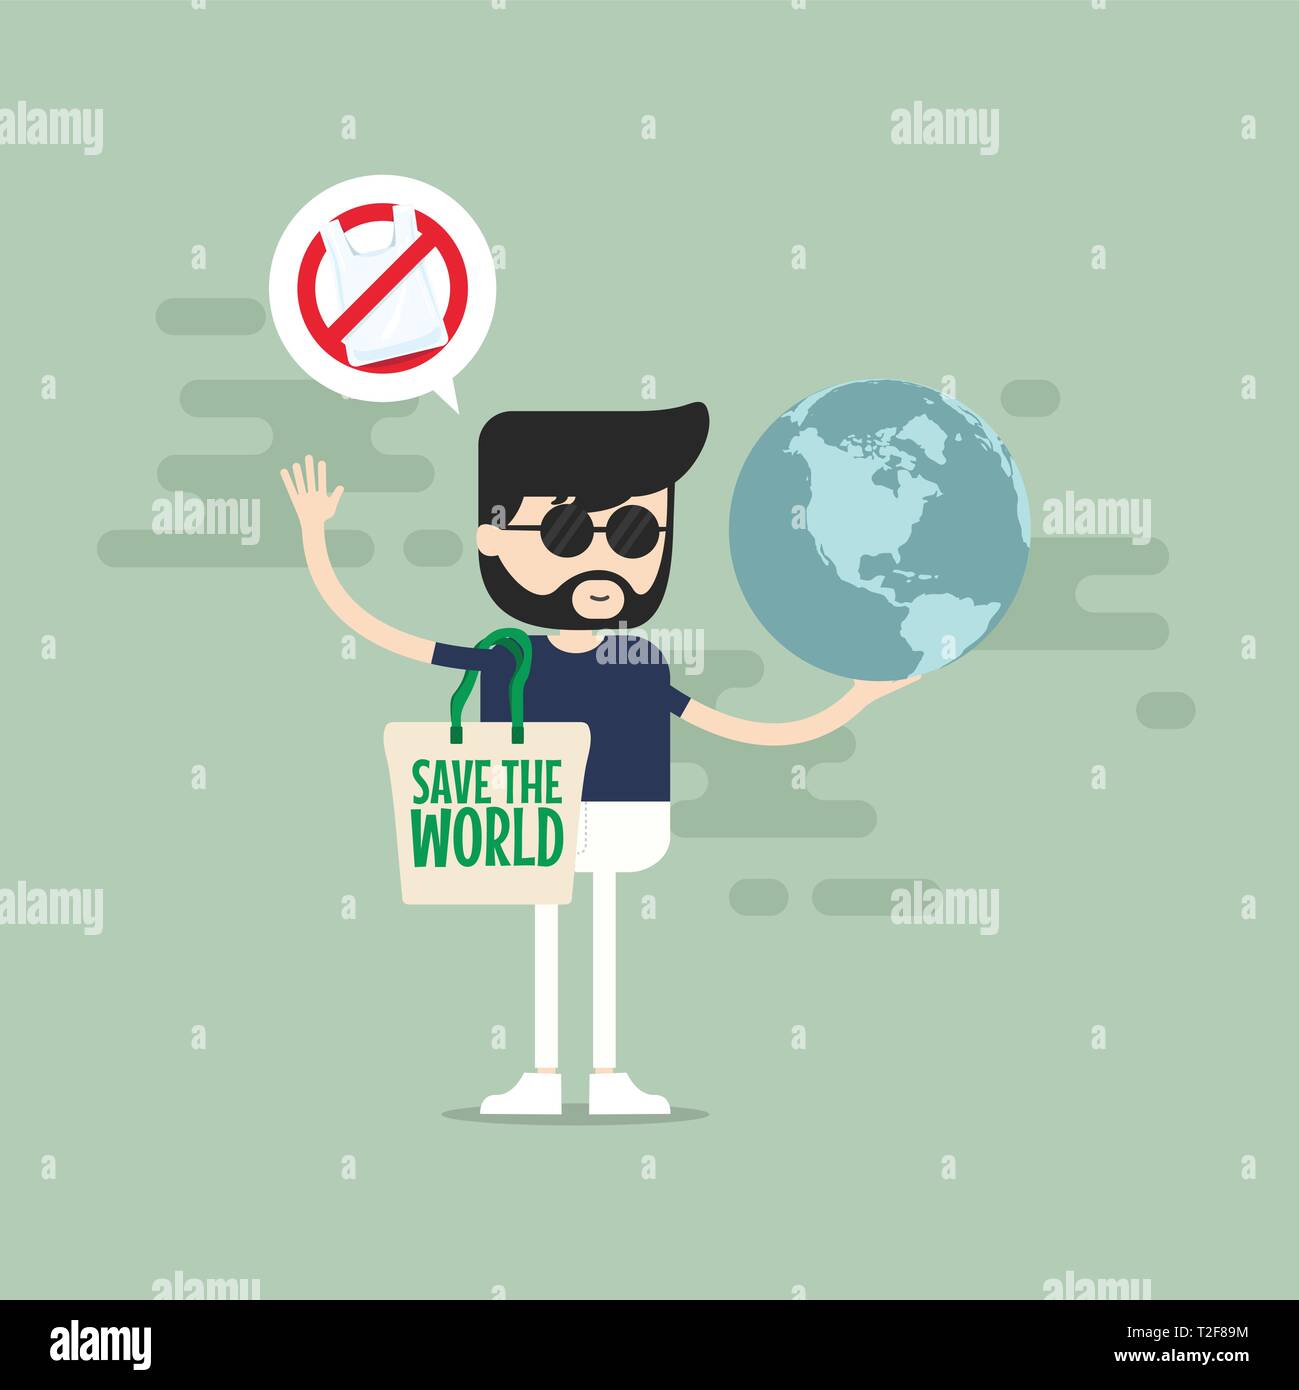 Say no to plastic bags. Hipster man holding a globe. Stock Vector